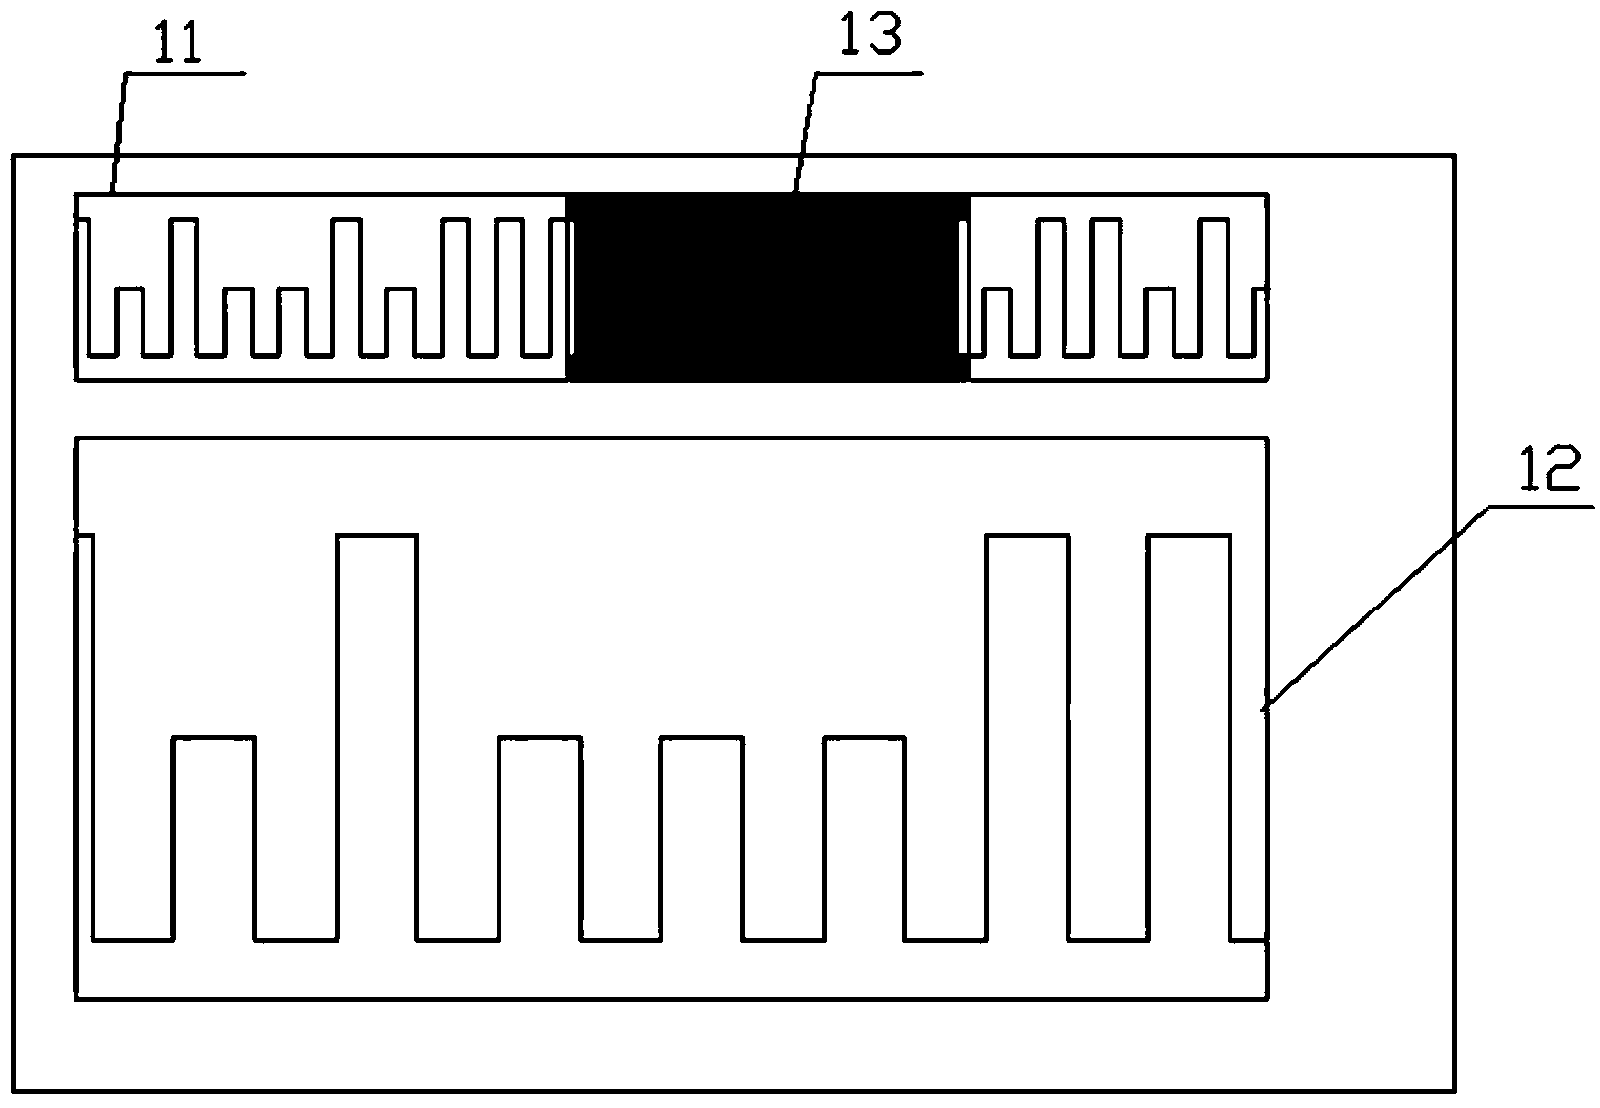 Method and device for horizontal movement of waveform based on touch screen